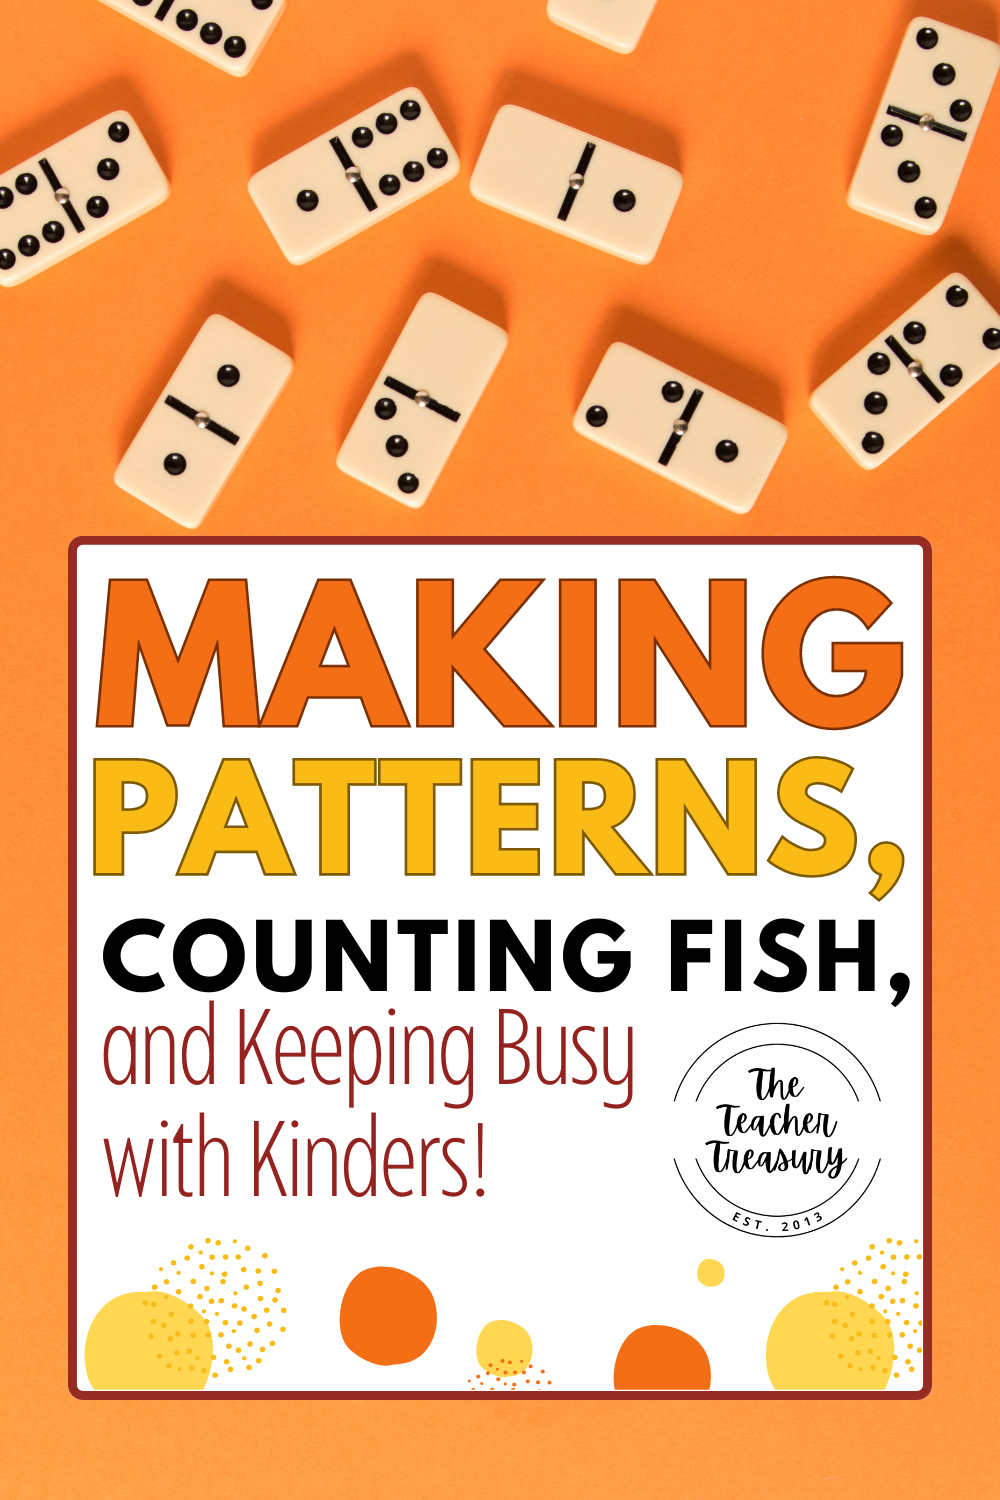 Making patterns with kindergarteners 